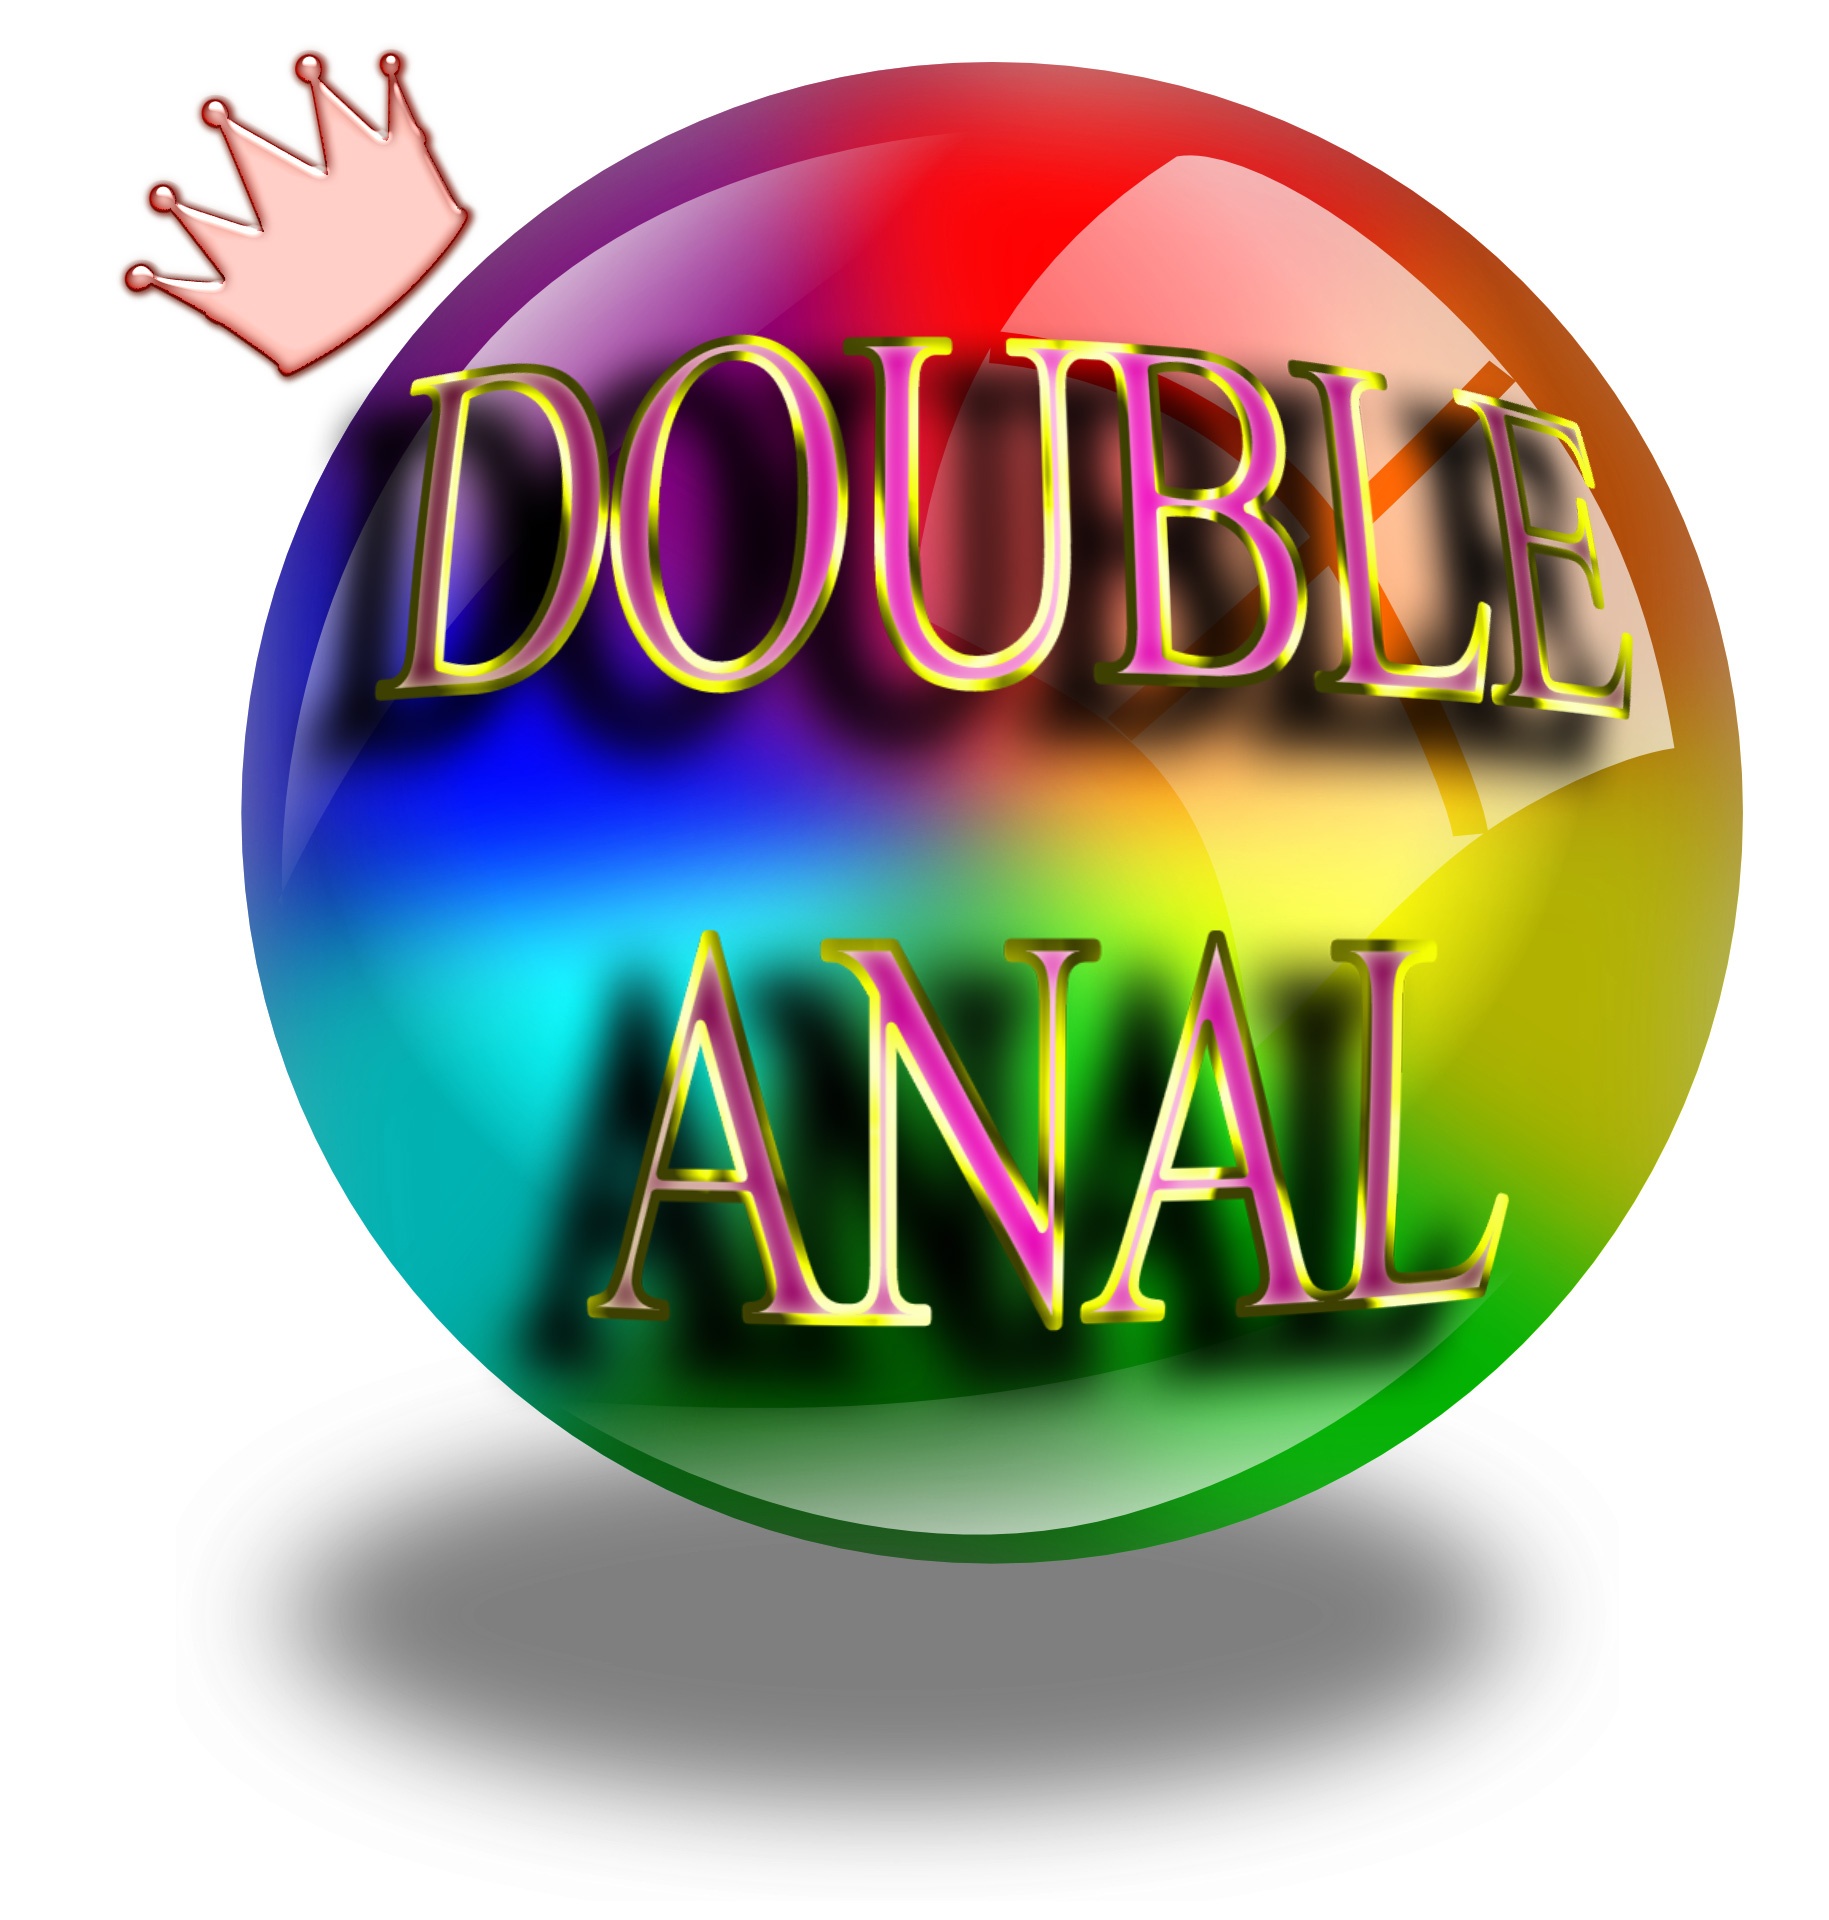 Double Anal Star Information